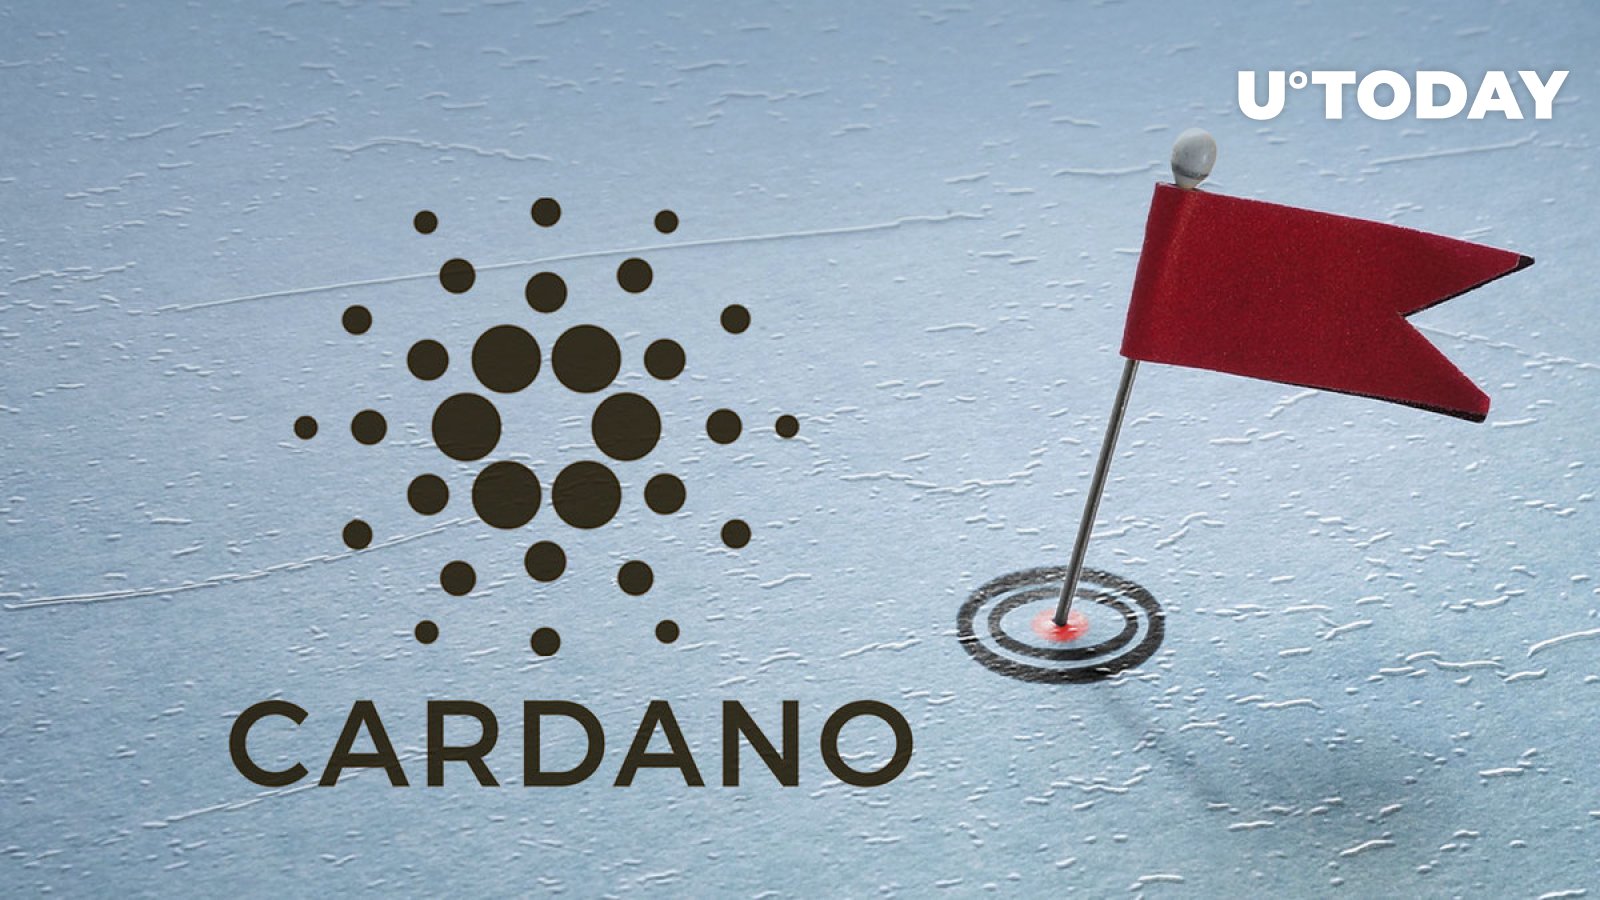 Cardano Community Raises Red Flags on Two Projects: Details